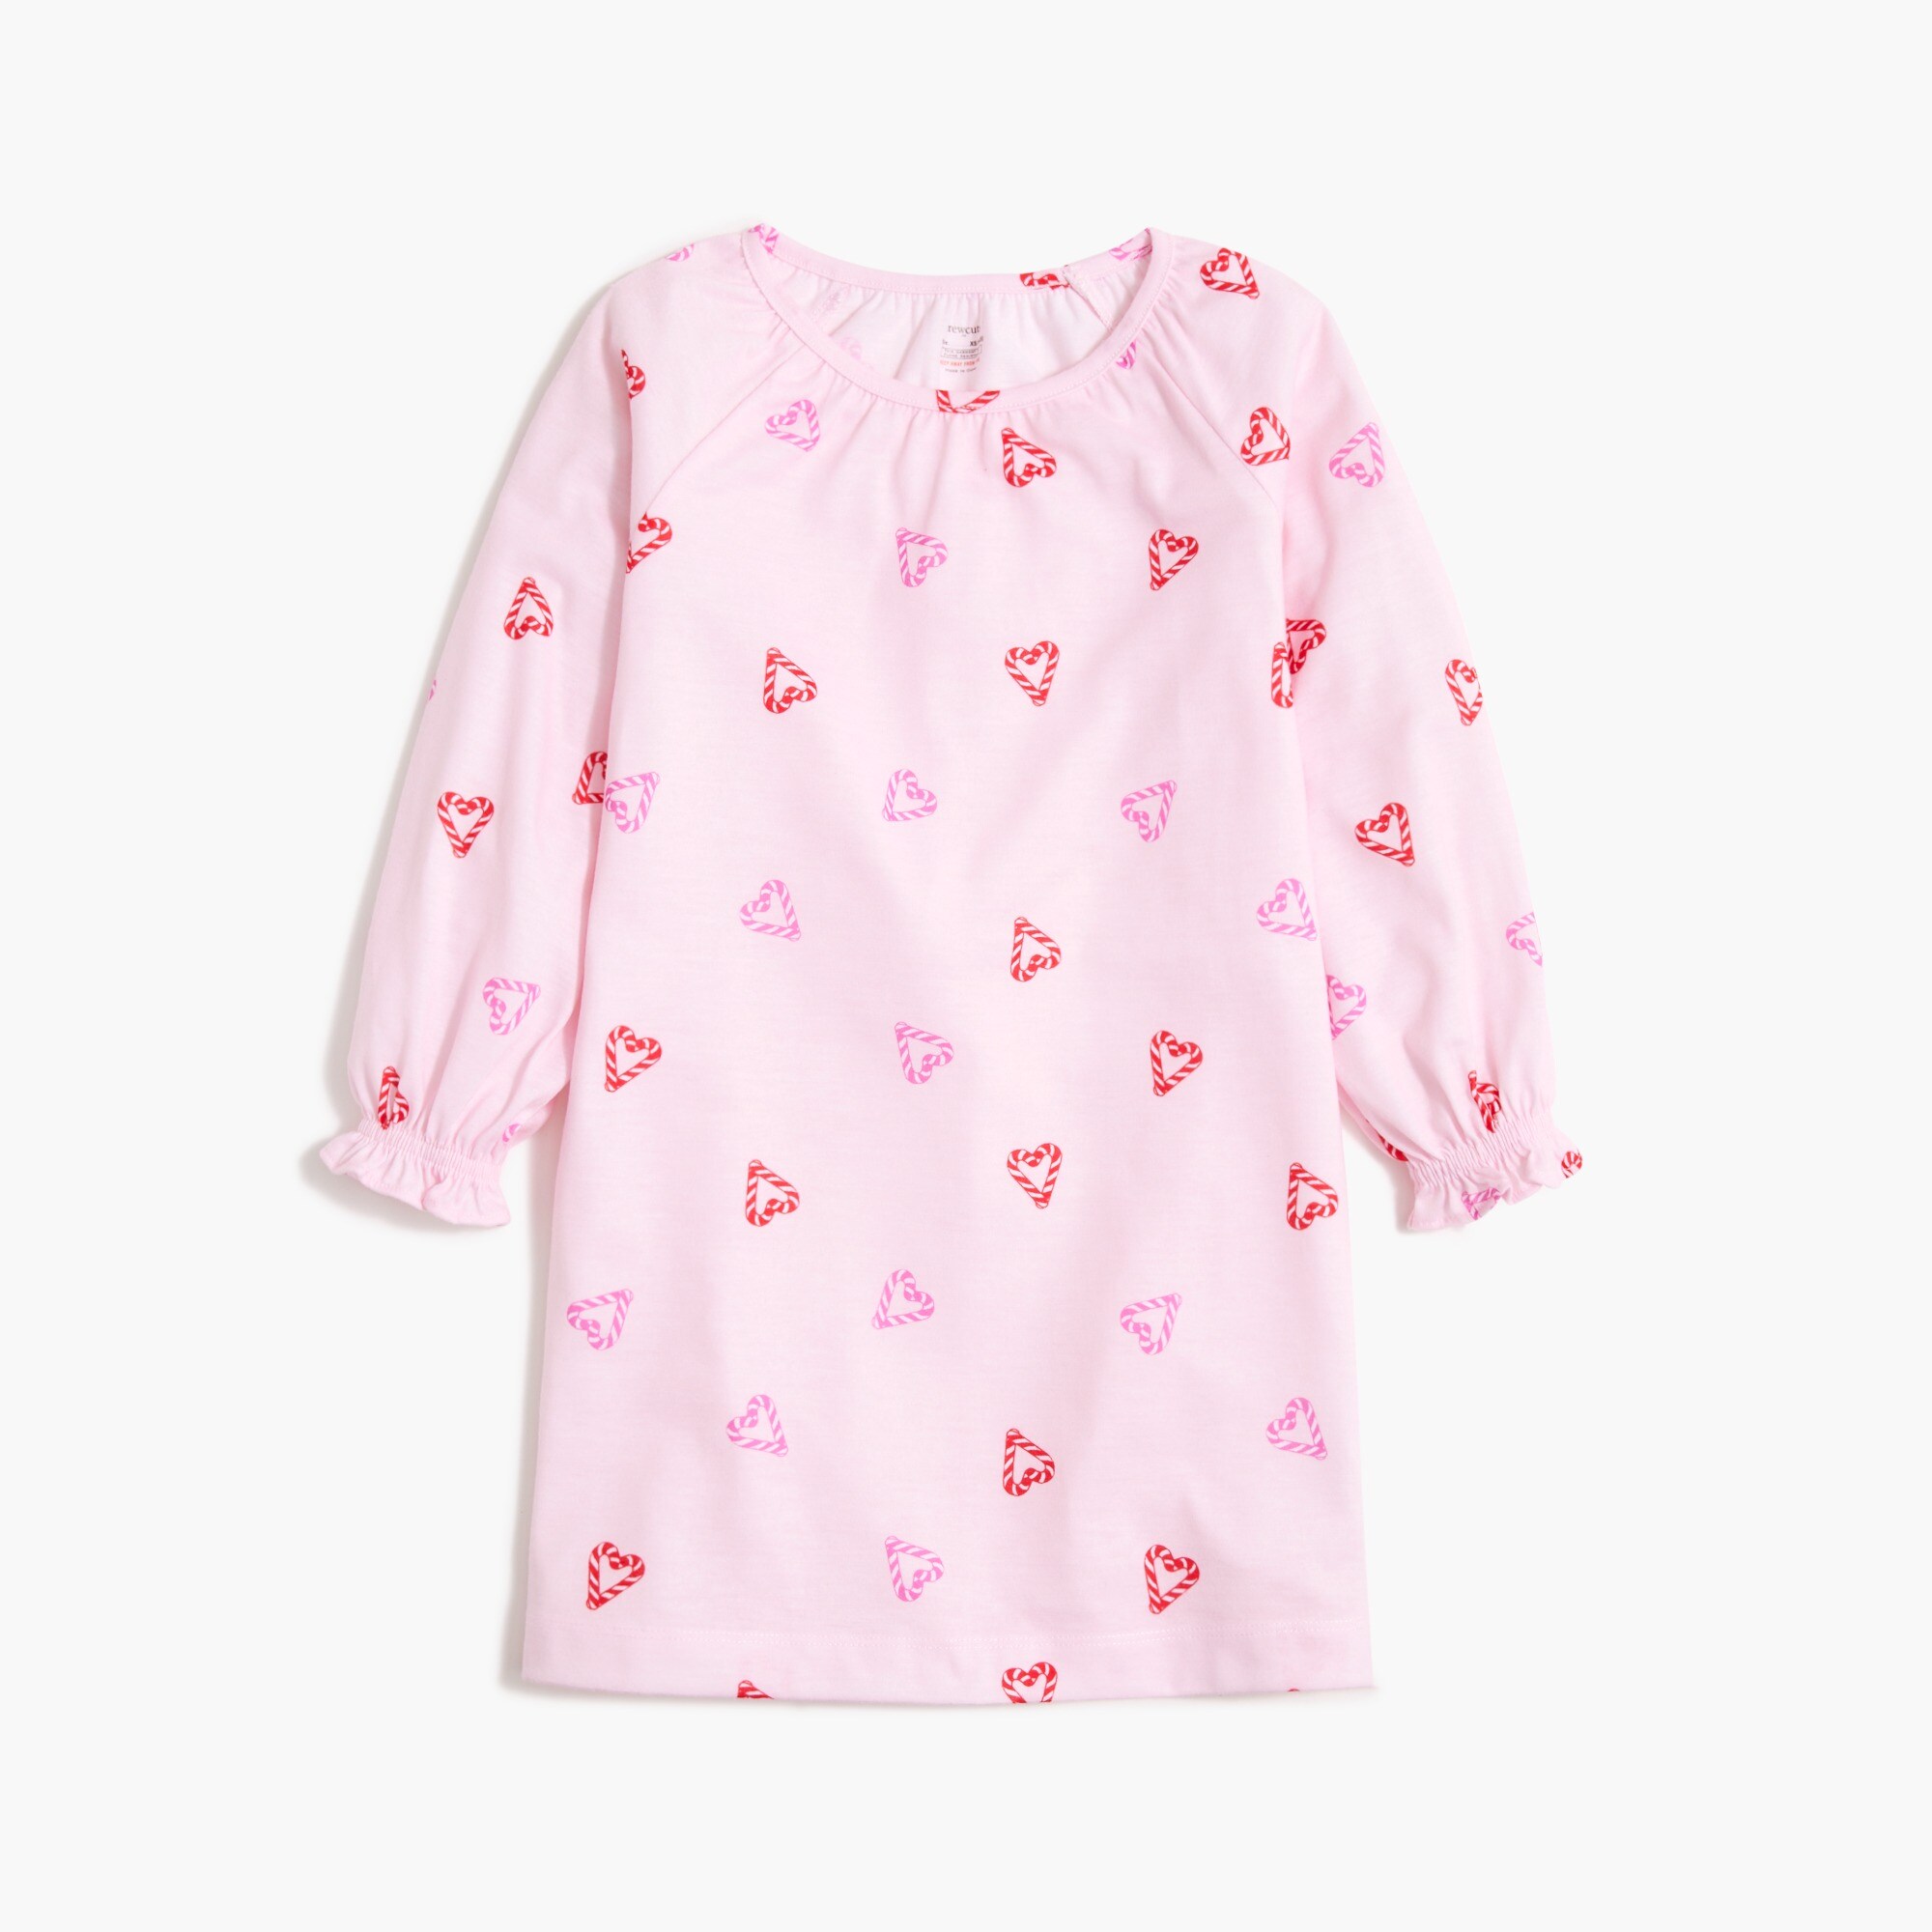  Girls' candy cane heart nightgown